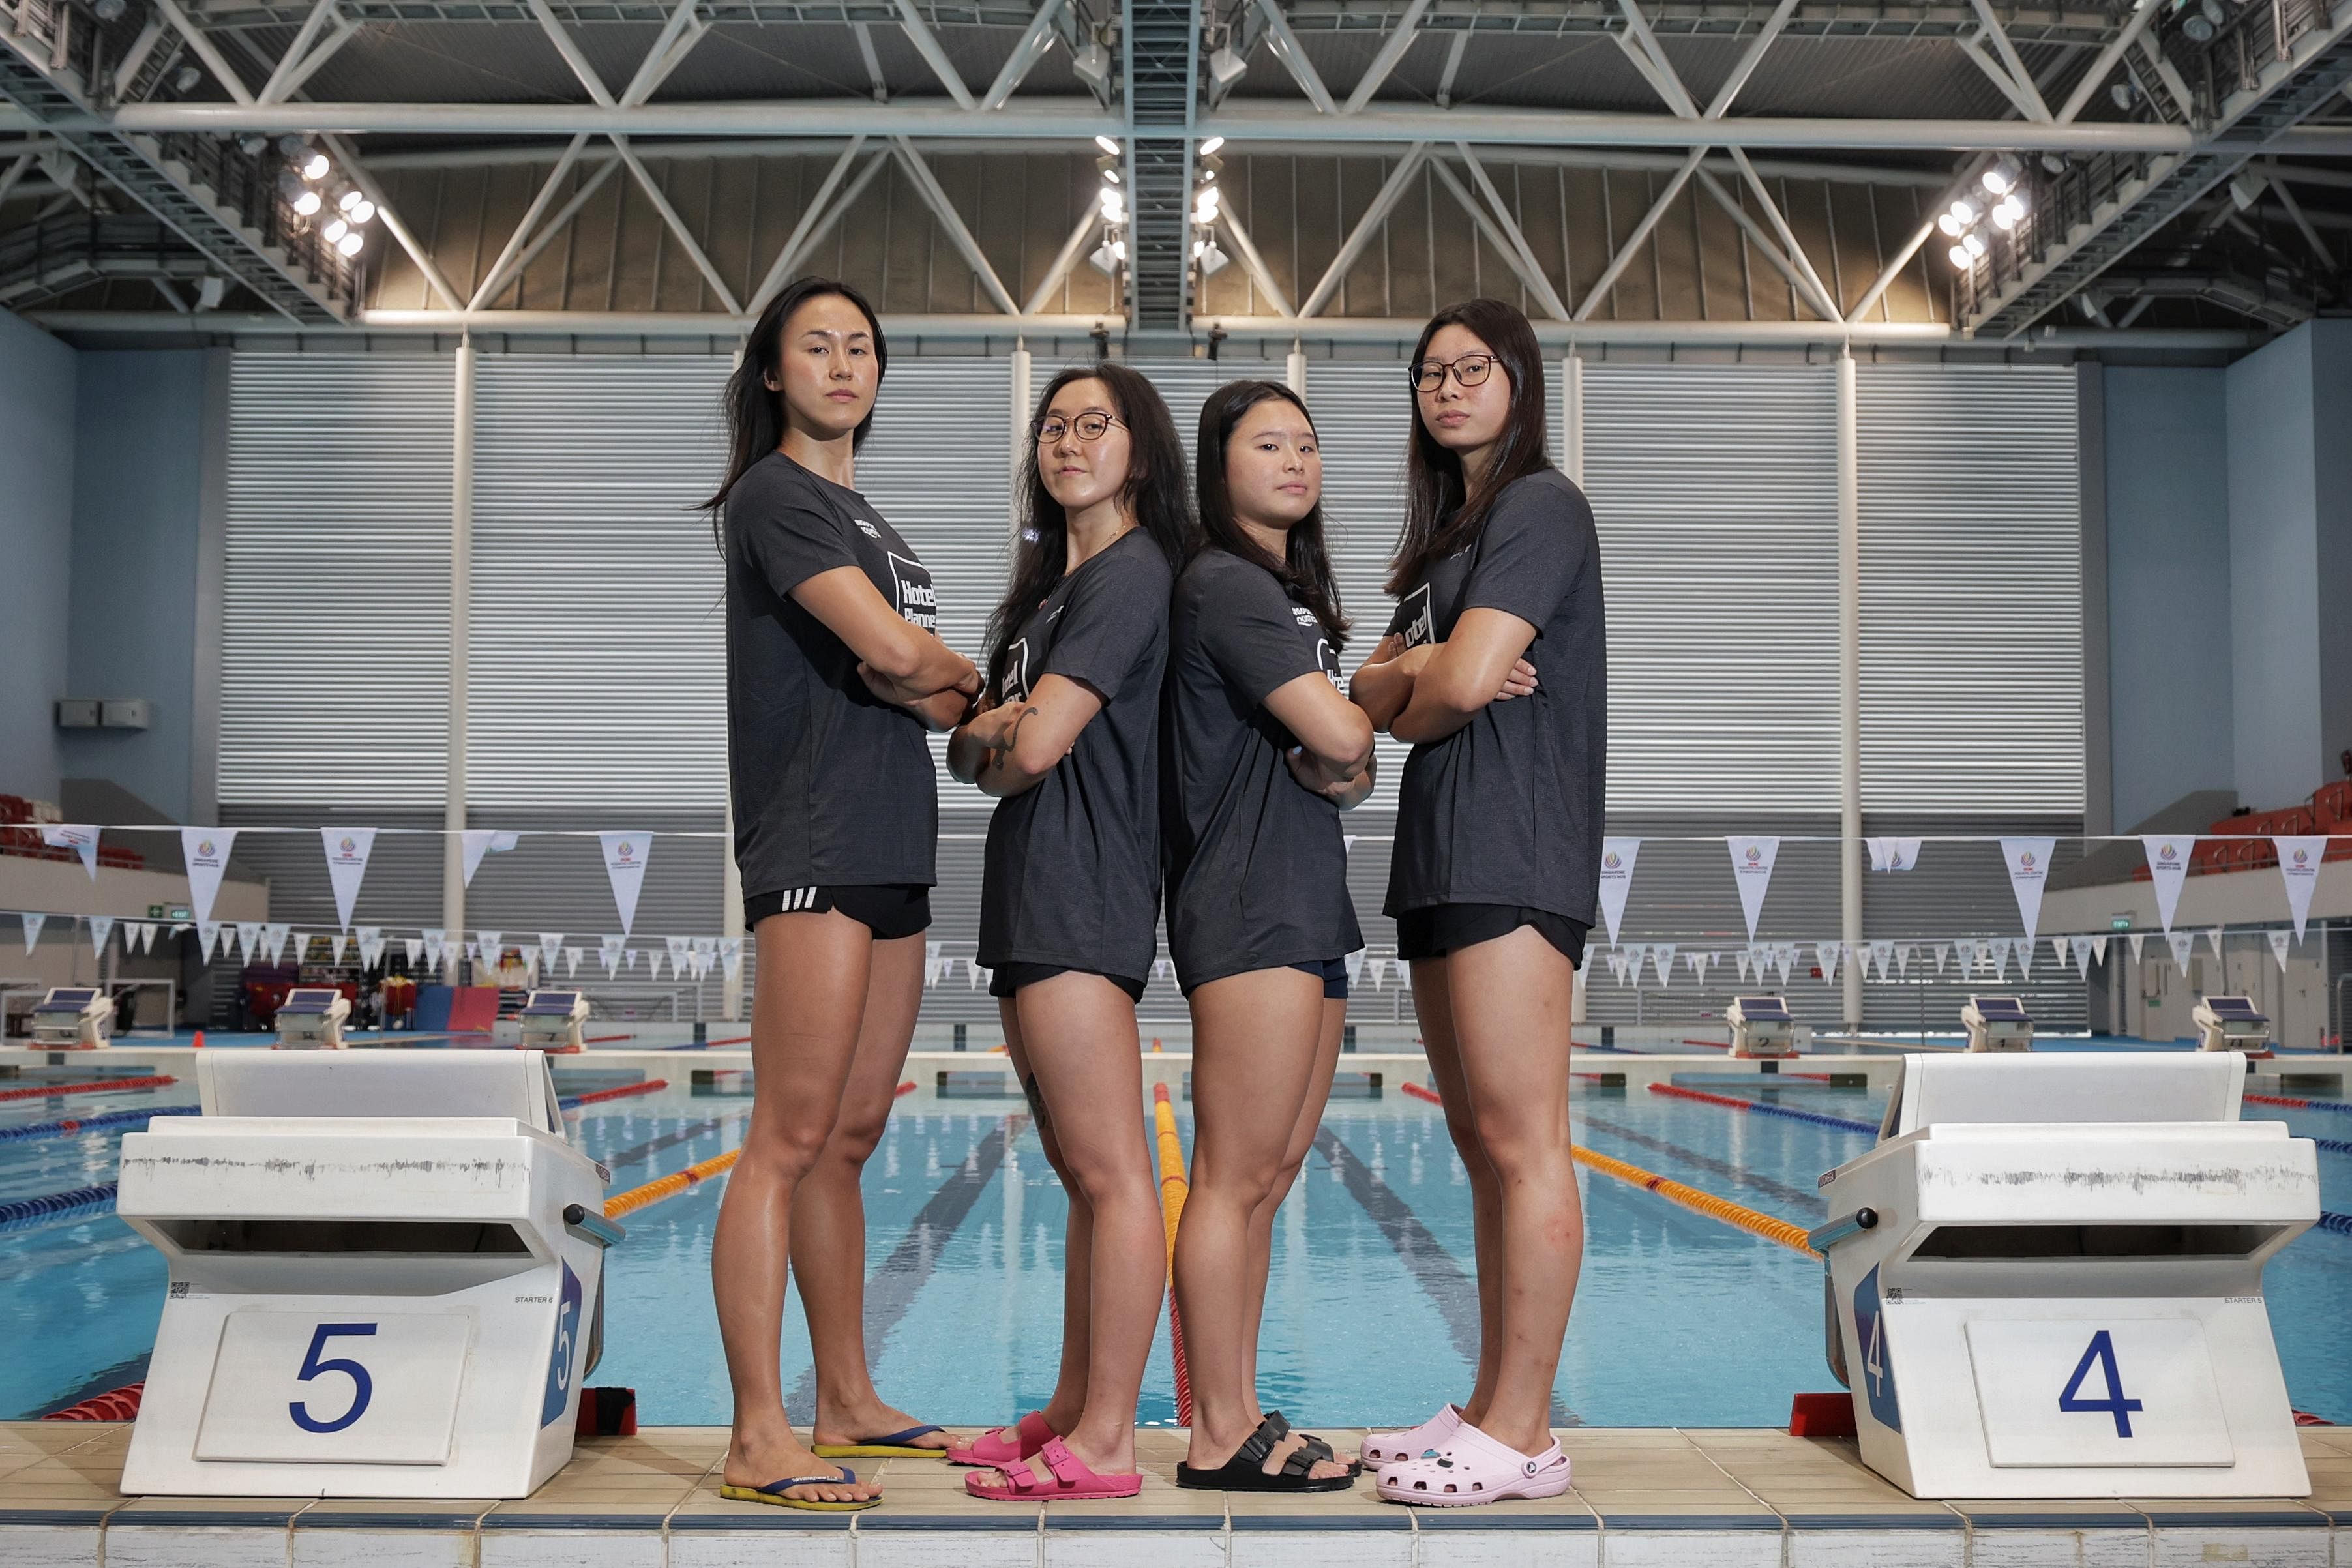 Singapore sisters making waves with Olympic qualification